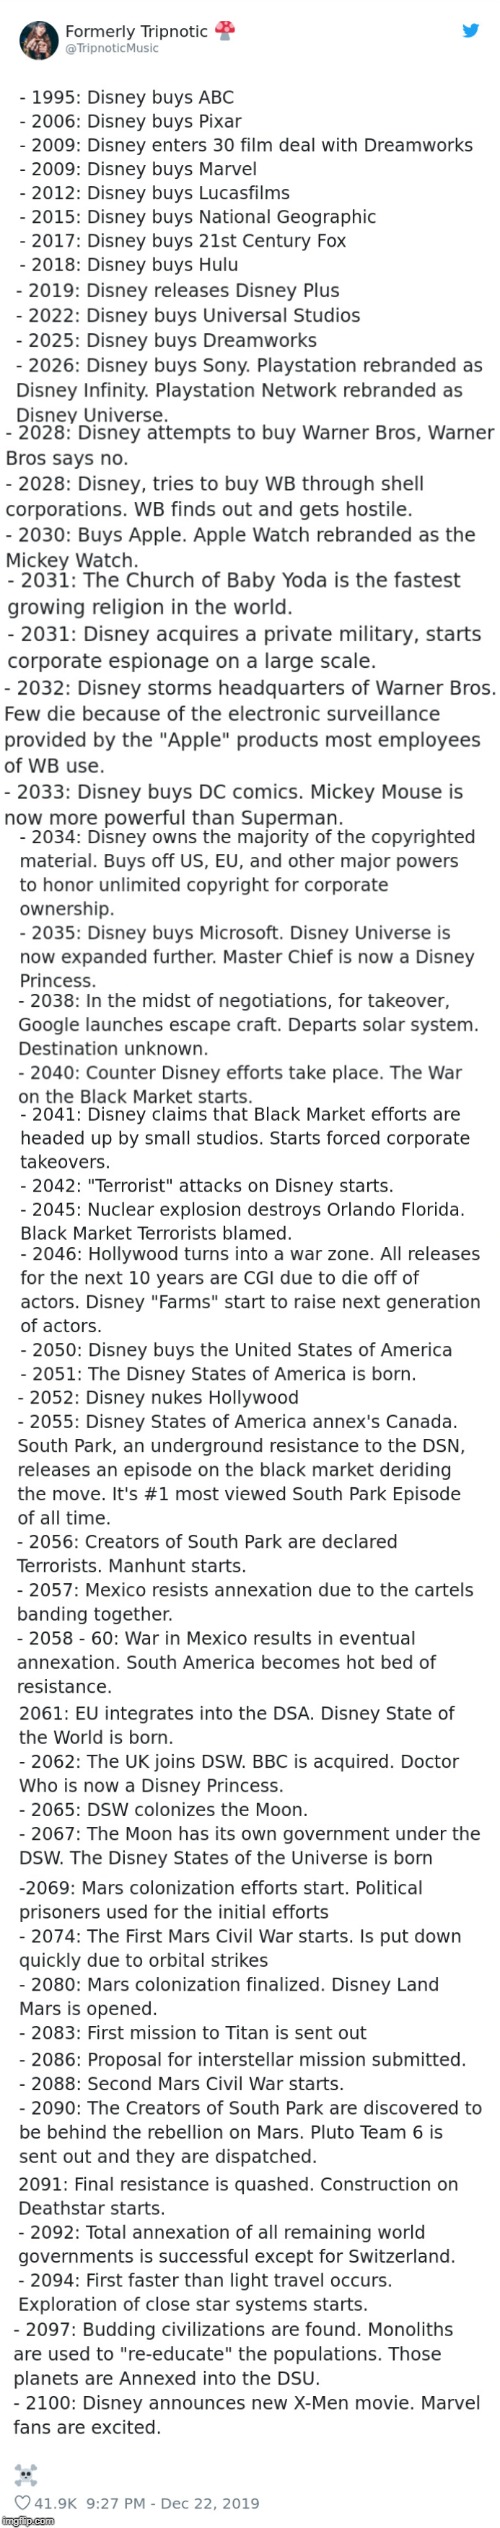 The Disney Takeover (Creddit to Dreux Moreland and boredpanda.com) | image tagged in disney,dystopia | made w/ Imgflip meme maker